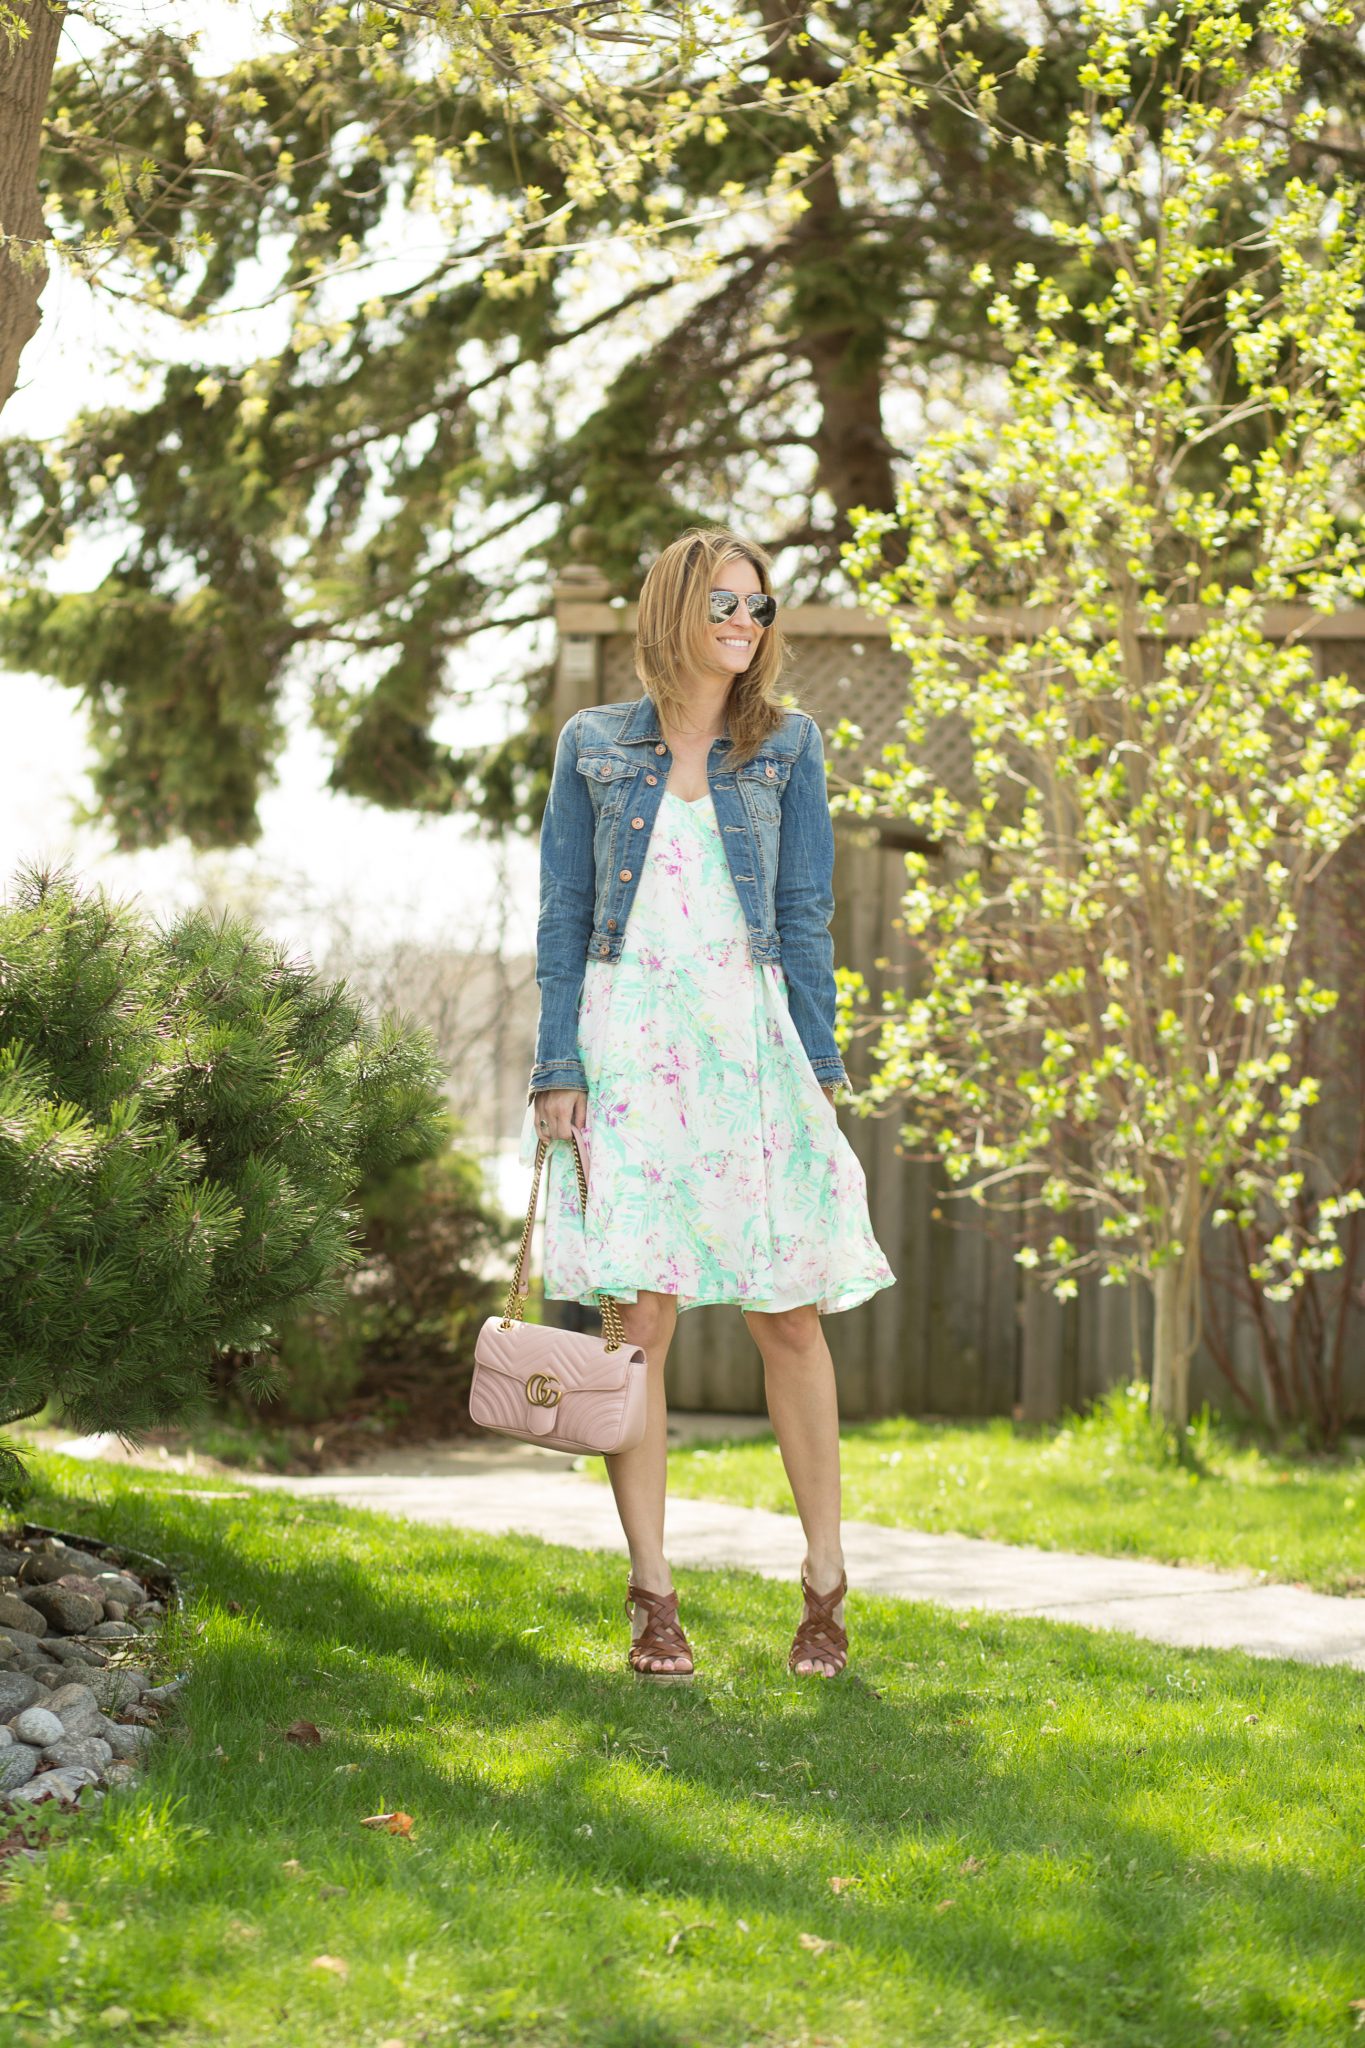 sparkleshinylove Mandy Furnis Floral dress from Pink Blush, Jean jacket from H&M, Pink Gucci bag, silver Ray-Ban sunglasses and wedges from Charlotte Russe